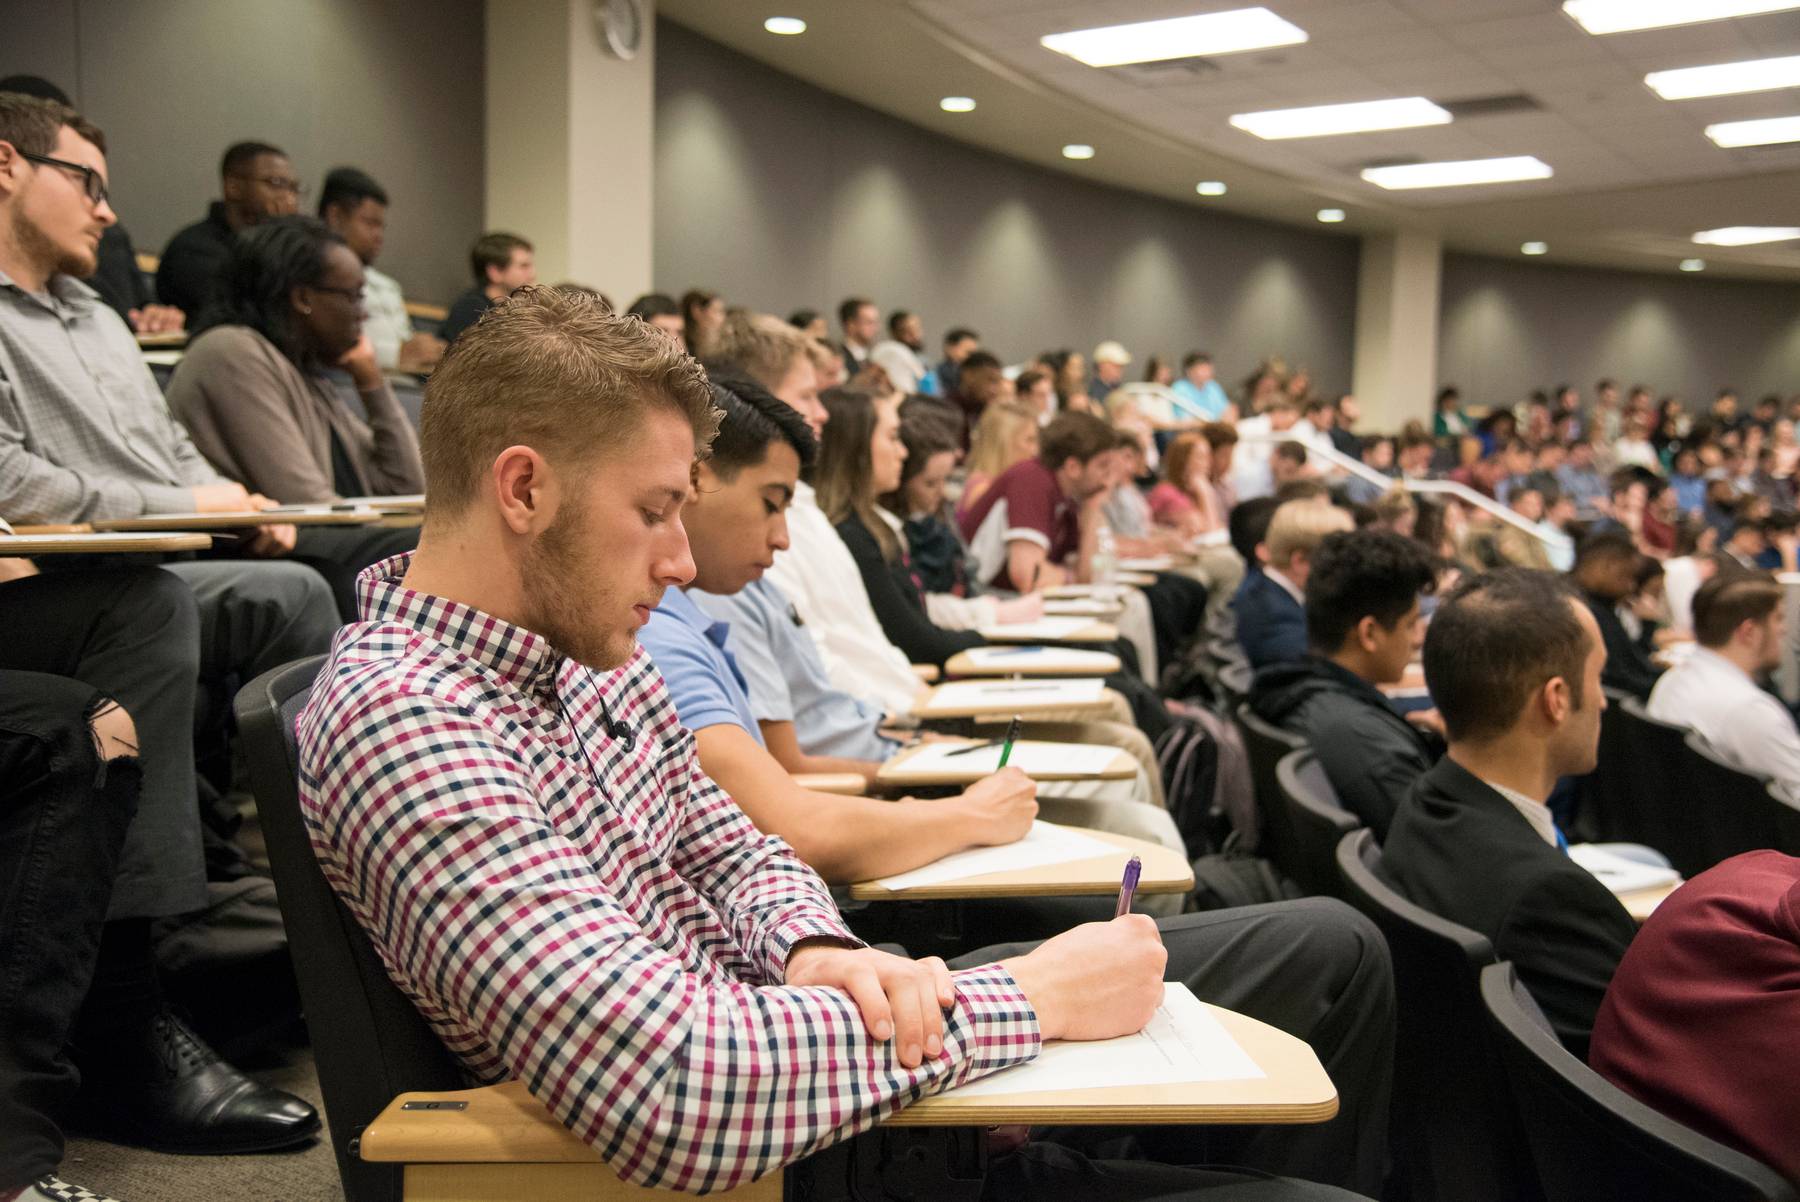 students sit in a row during a lecture